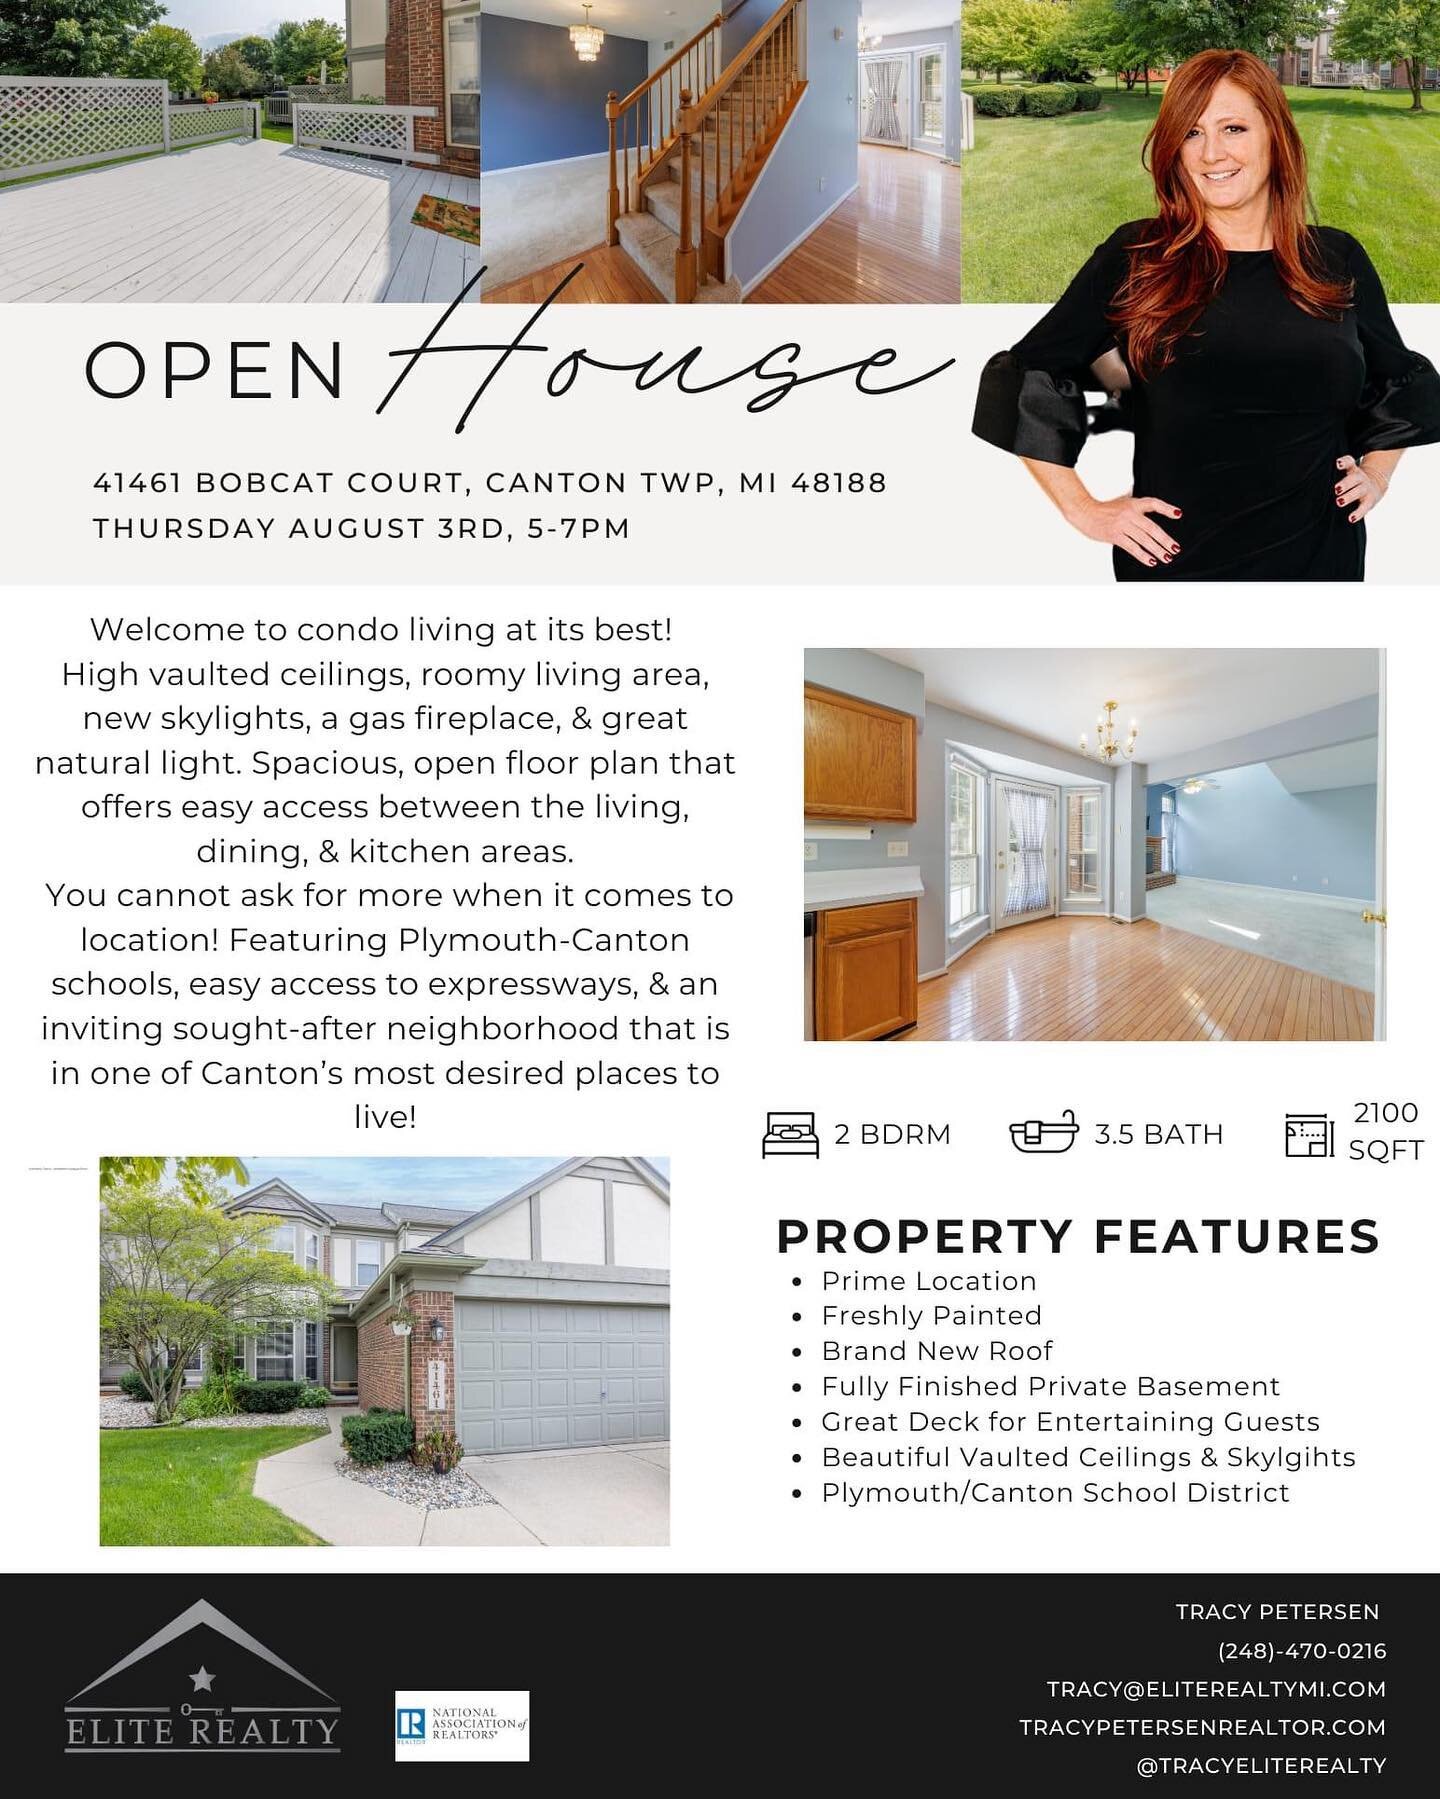 For all the buyers out there looking for a great condo in Canton - Come see me tomorrow between 5pm-7pm! 🏡

Prime location with some unbeatable features! This property won&rsquo;t last long! 👏🏼 
.
.
.
.
.

#newlisting #michiganrealtors #michiganho